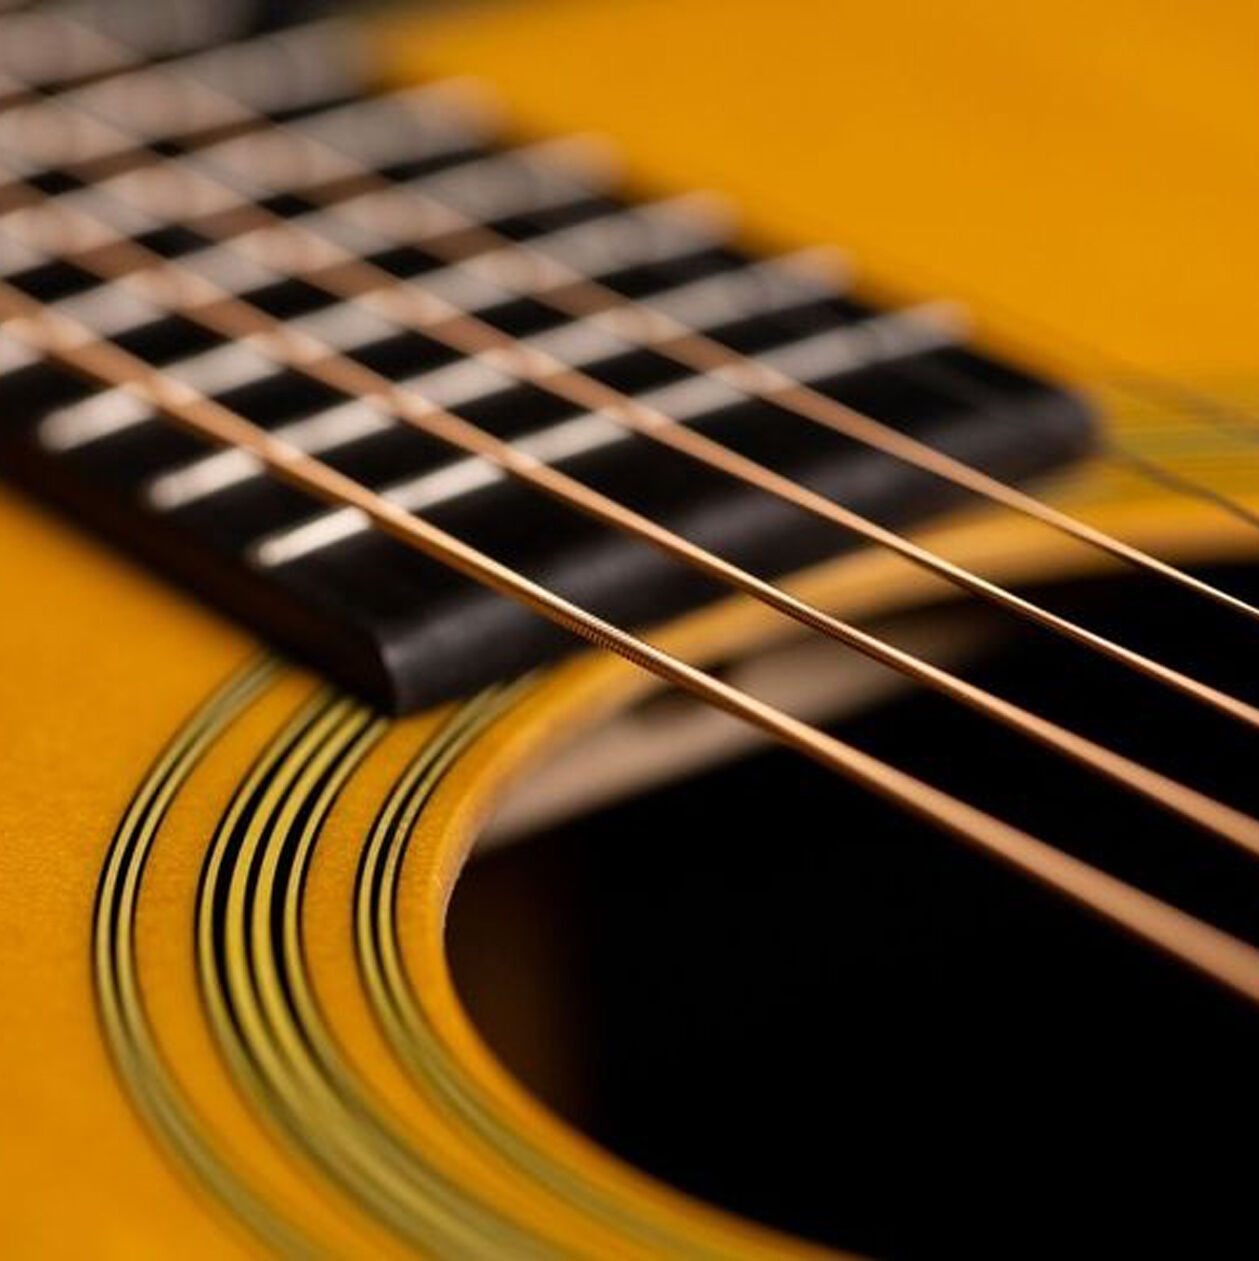 Closeup of guitar strings on an acoustic guitar